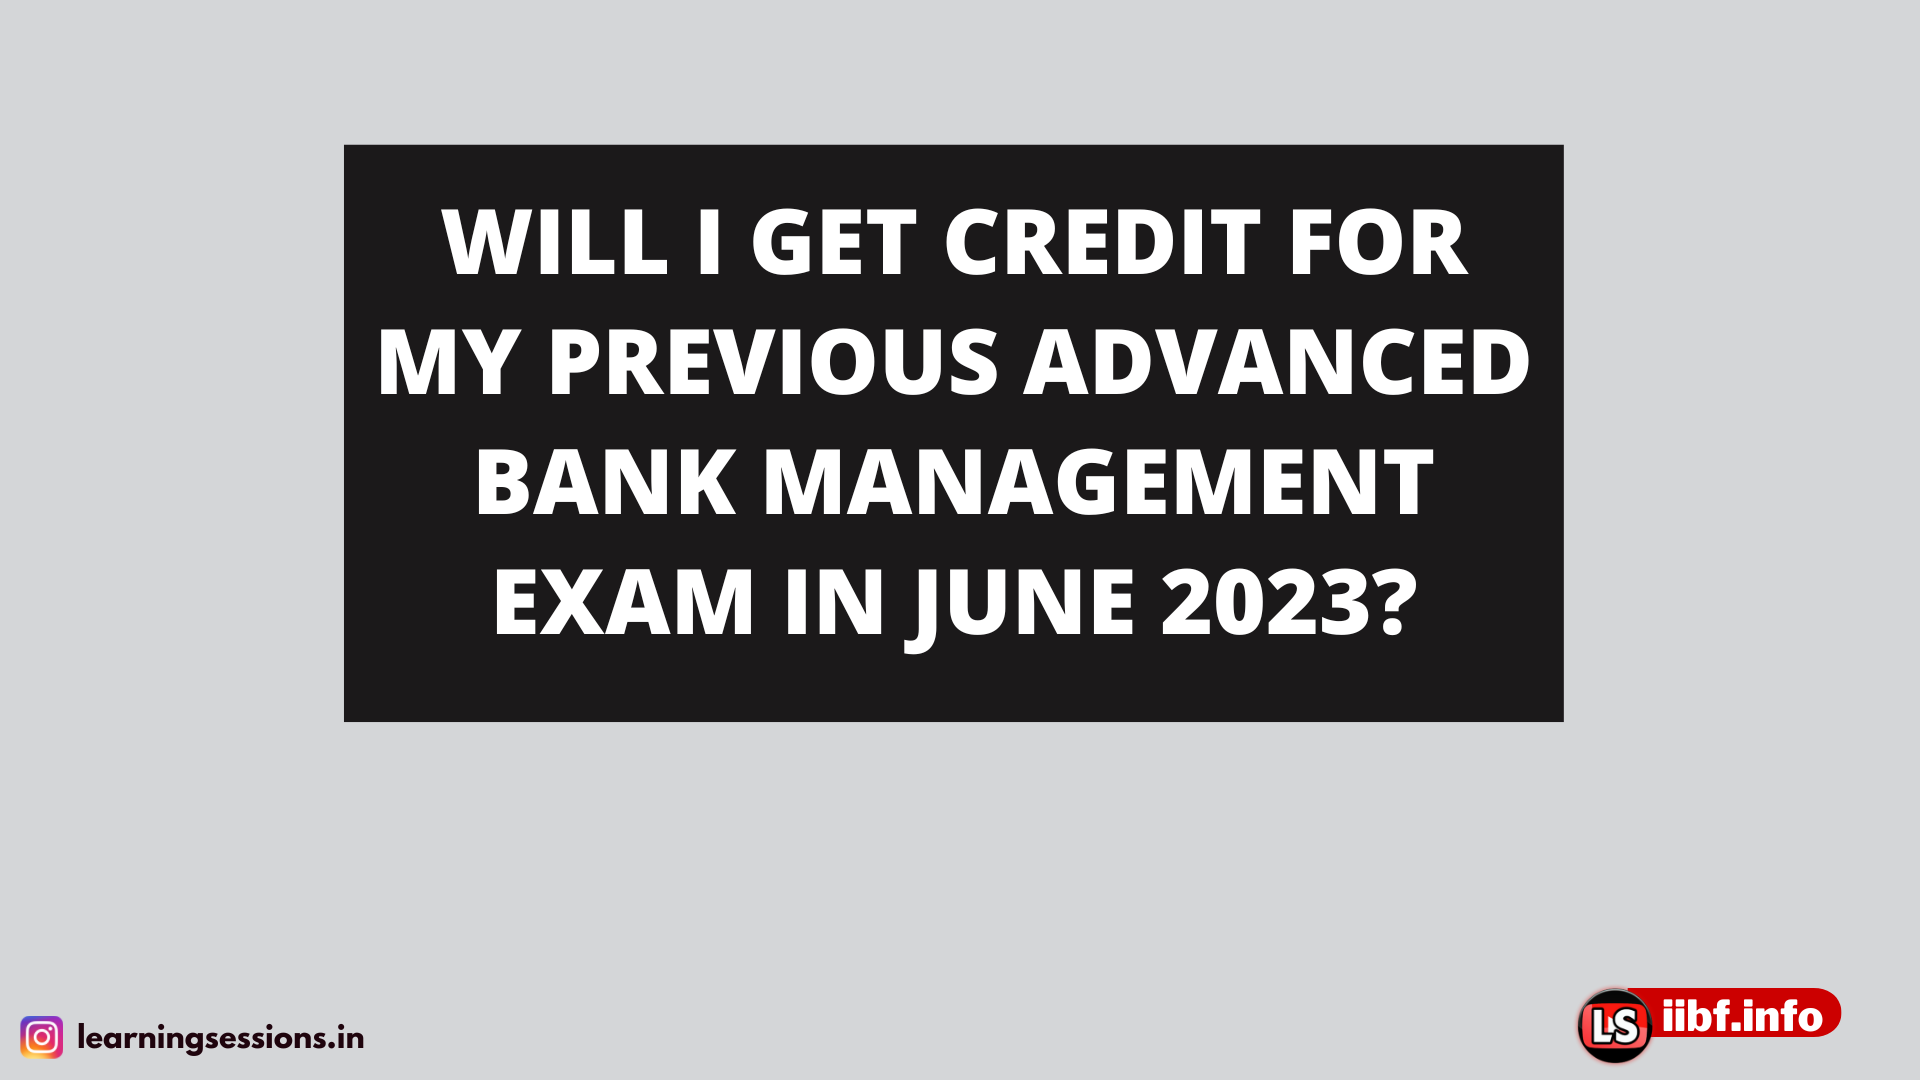 WILL I GET CREDIT FOR MY PREVIOUS ADVANCED BANK MANAGEMENT EXAM IN JUNE 2023?